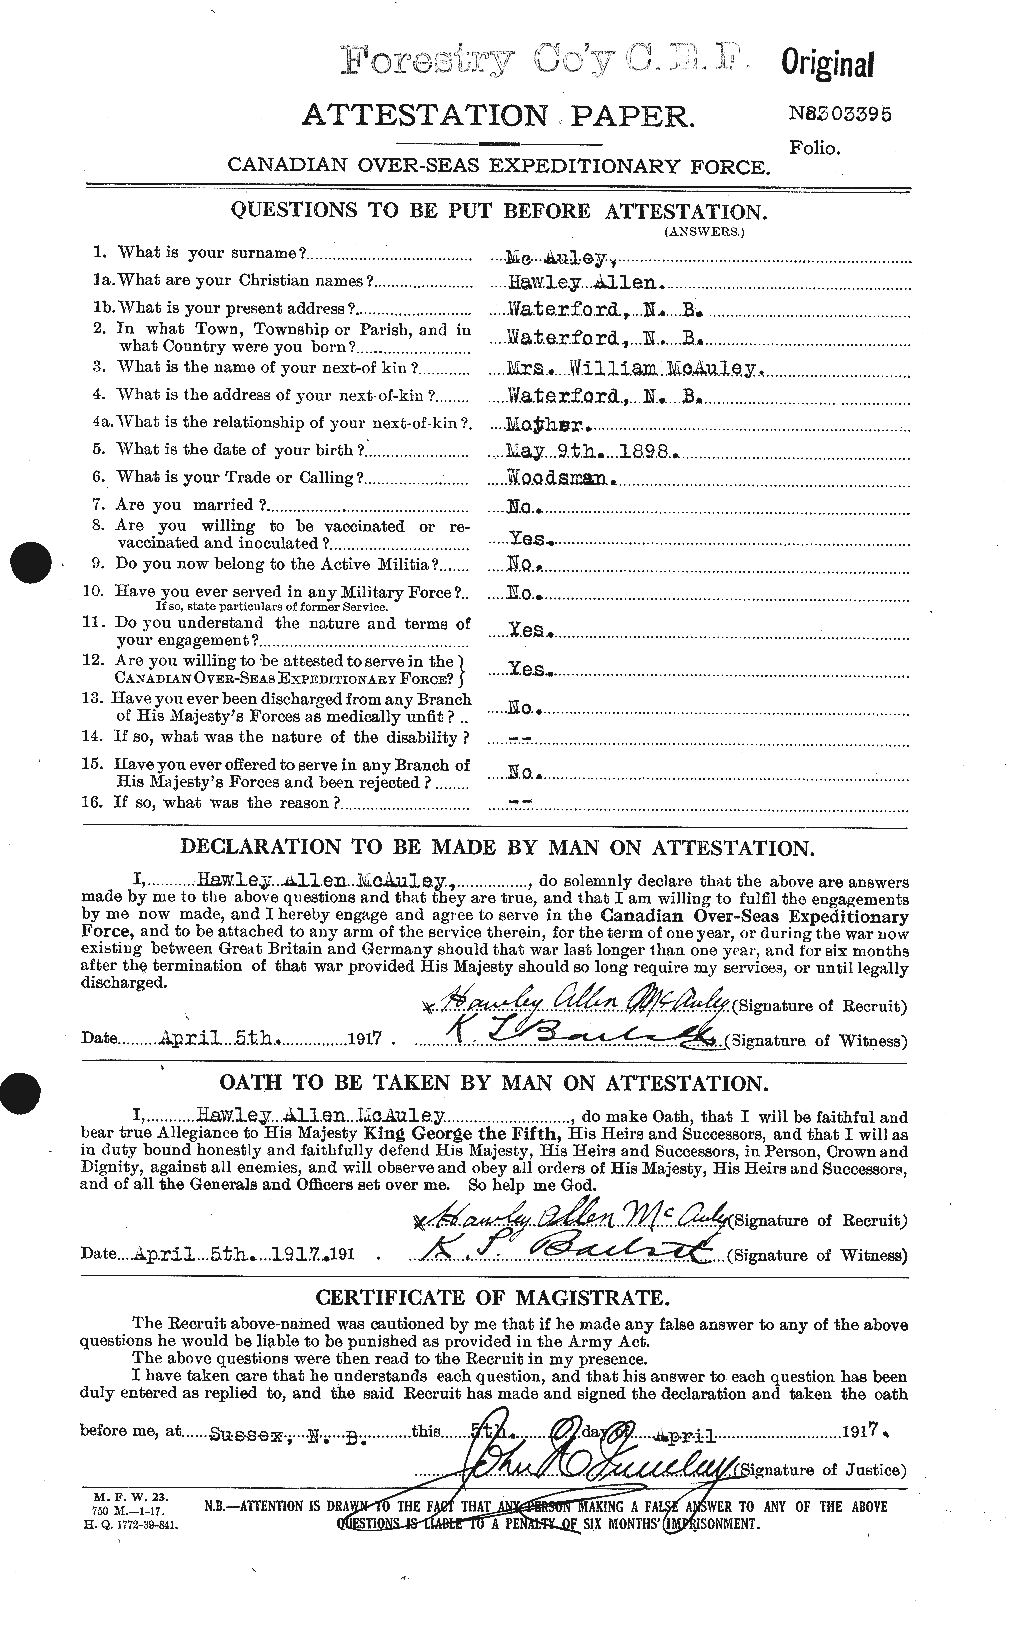 Personnel Records of the First World War - CEF 130330a